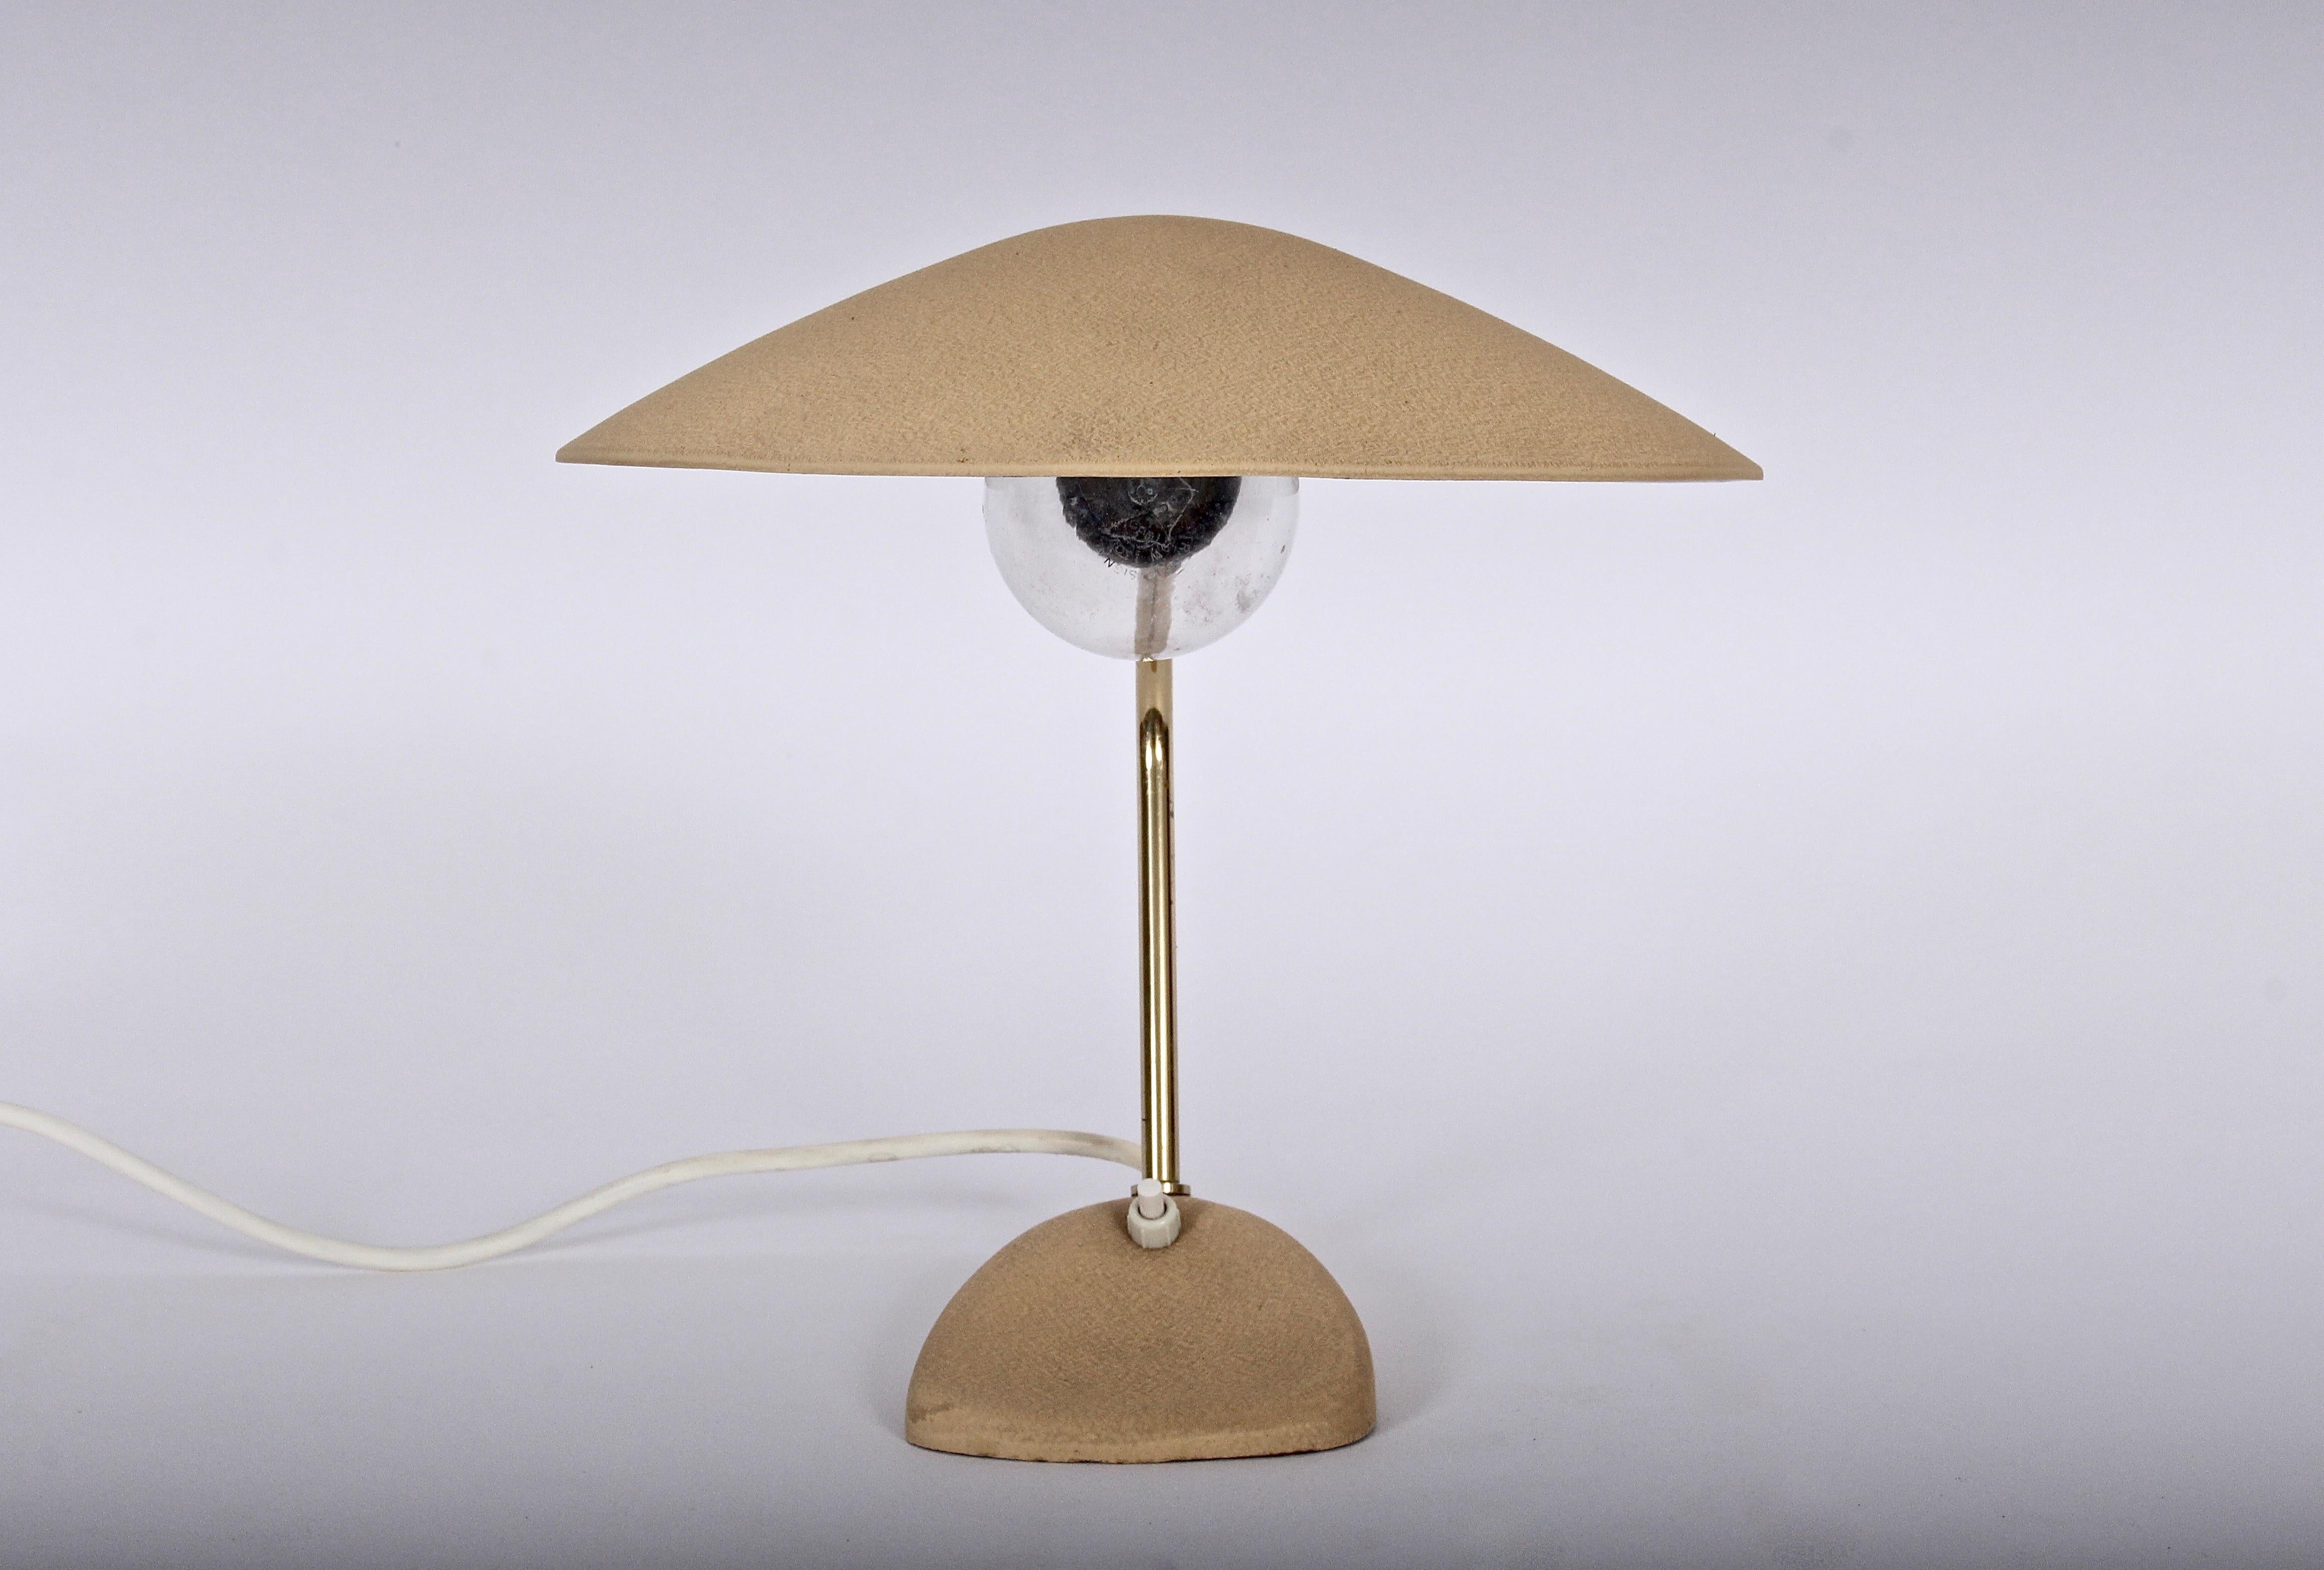 Enameled Stilnovo Style Camel toned Desk Lamp with Saucer Shade, circa 1950s For Sale